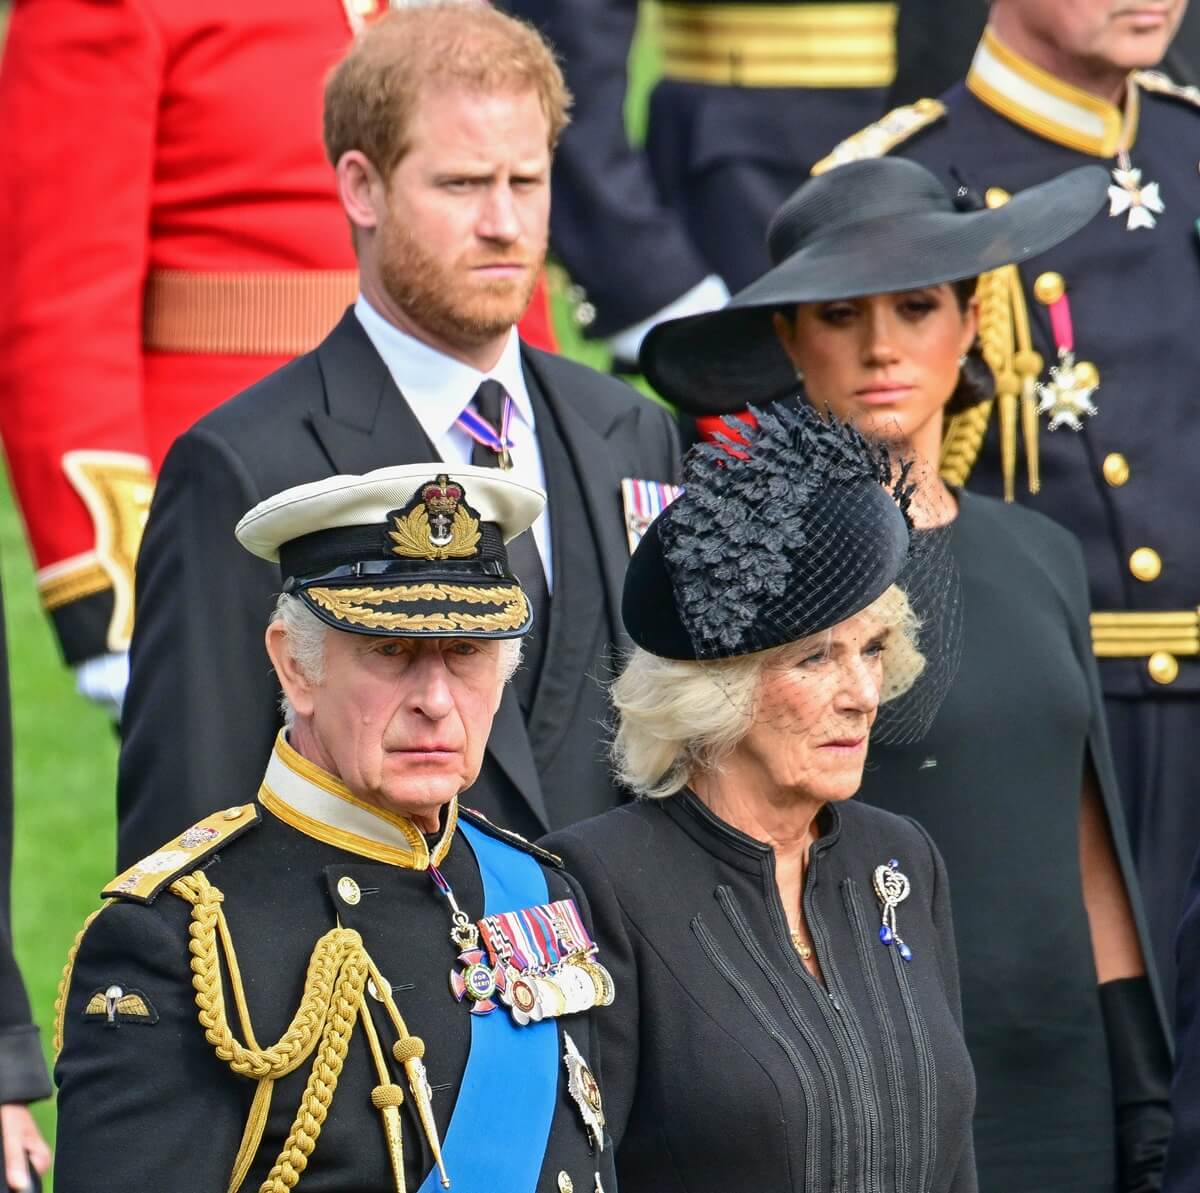 King Charles III, Queen Camilla, Prince Harry, and Meghan Markle observe the coffin of Queen Elizabeth II during her funeral